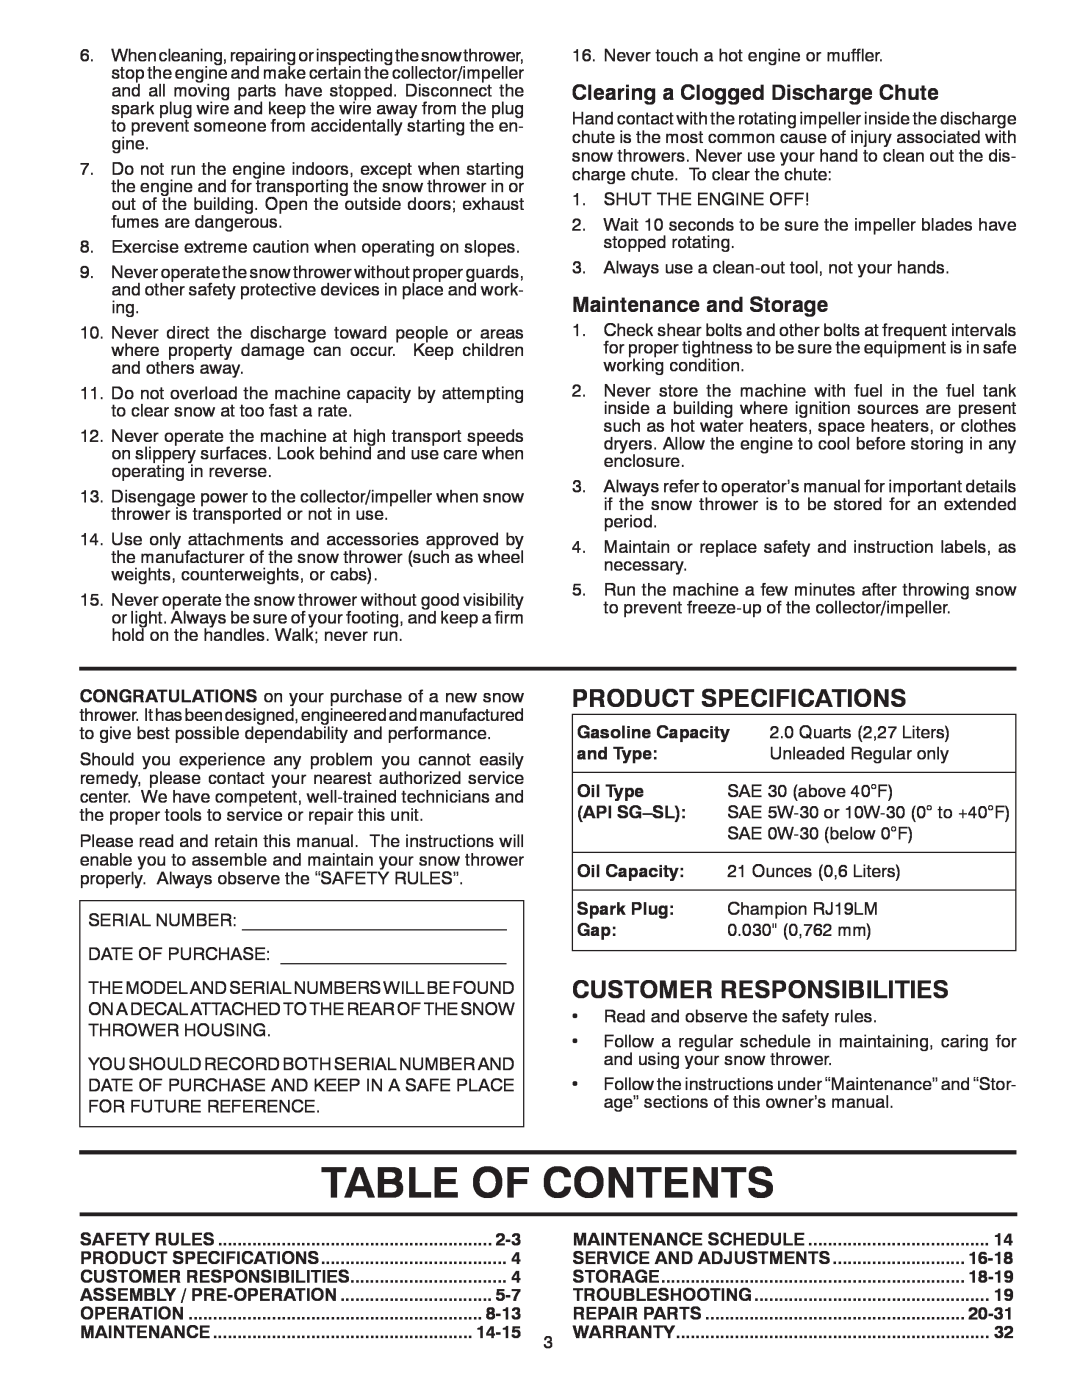 Poulan 415242 Table Of Contents, Product Specifications, Customer Responsibilities, Clearing a Clogged Discharge Chute 